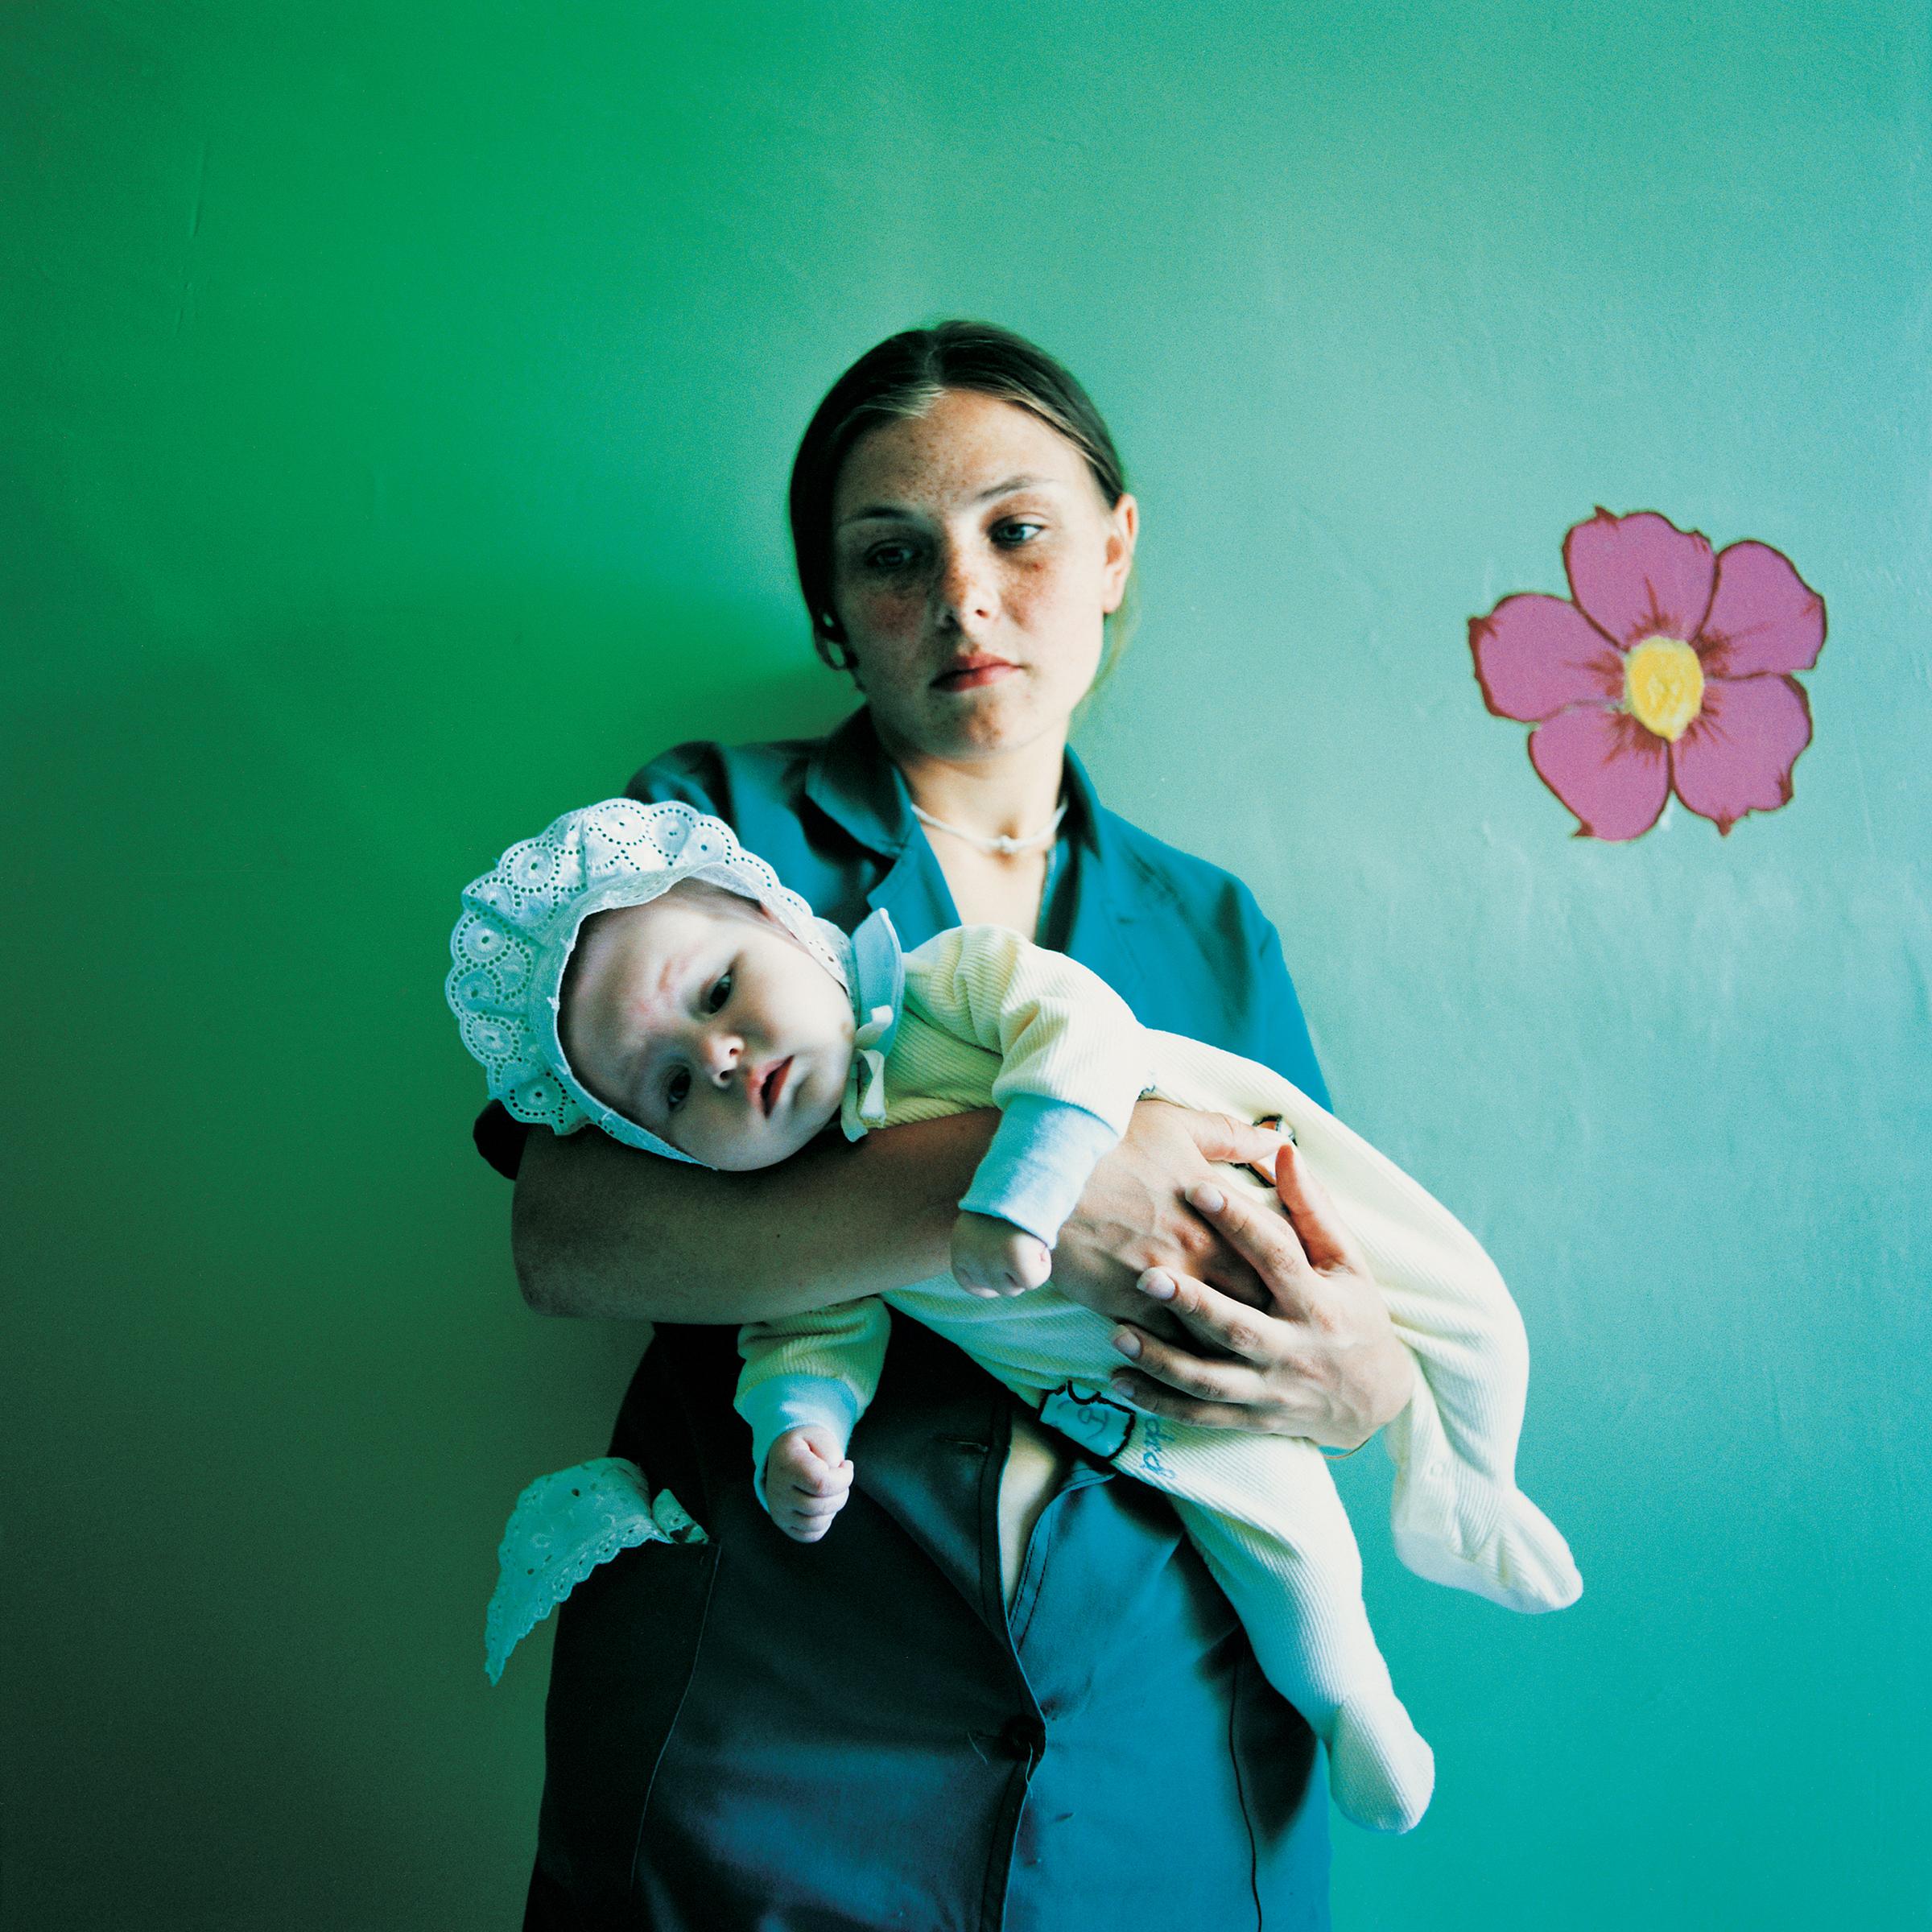 Michal Chelbin Portrait Photograph - Diana with Yulia (Sentenced for Theft): Prison for Women with Children